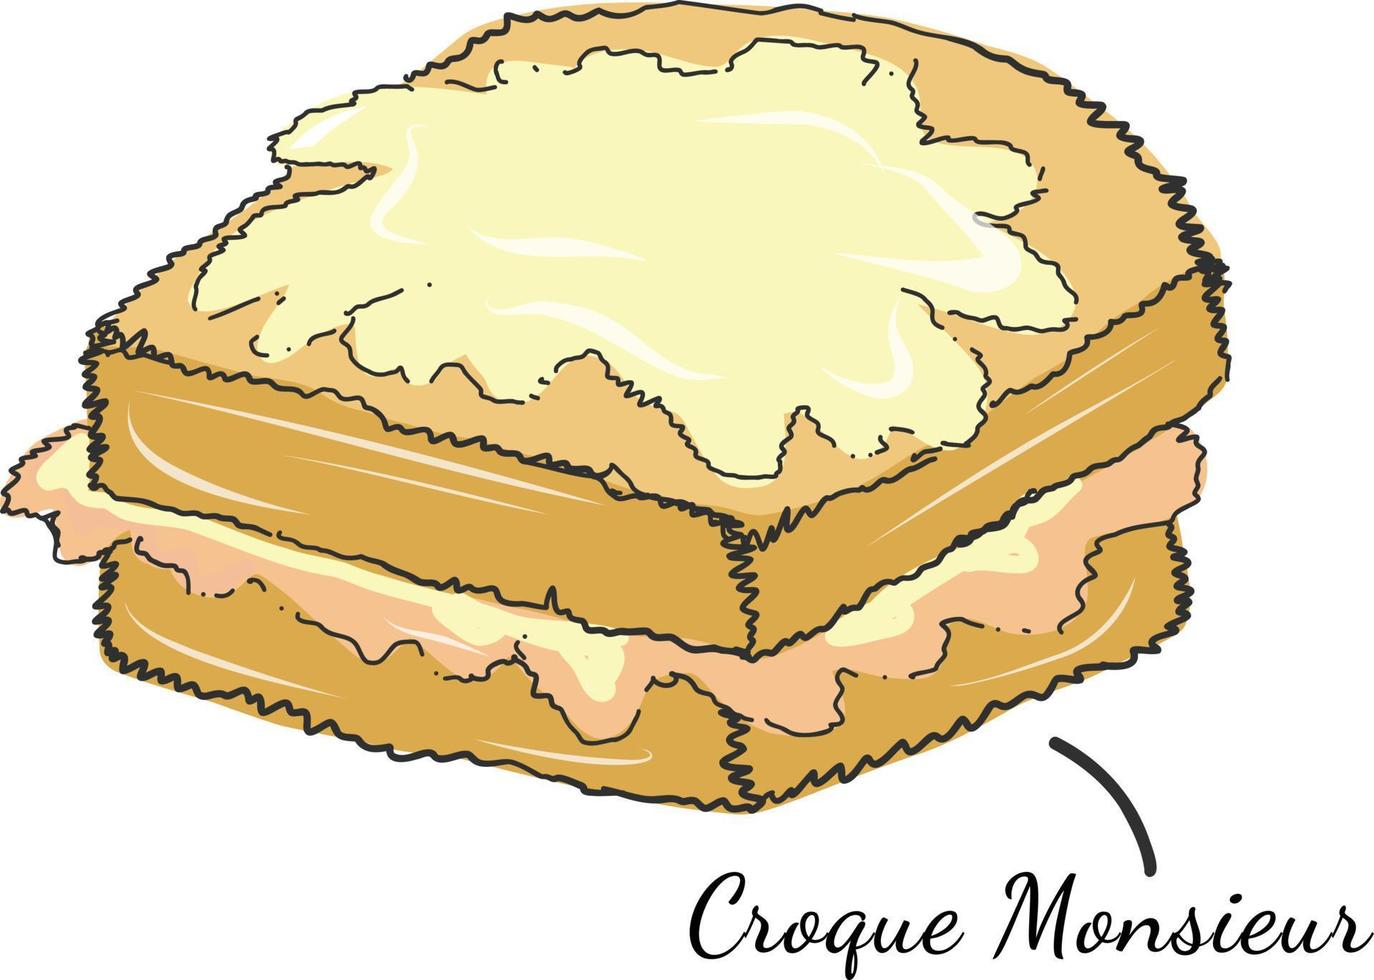 Traditional Croque monsieur a Ham and Cheese Sandwich French food doodle illustration. Doodle styled European traditional Croque Monsieur dish. vector